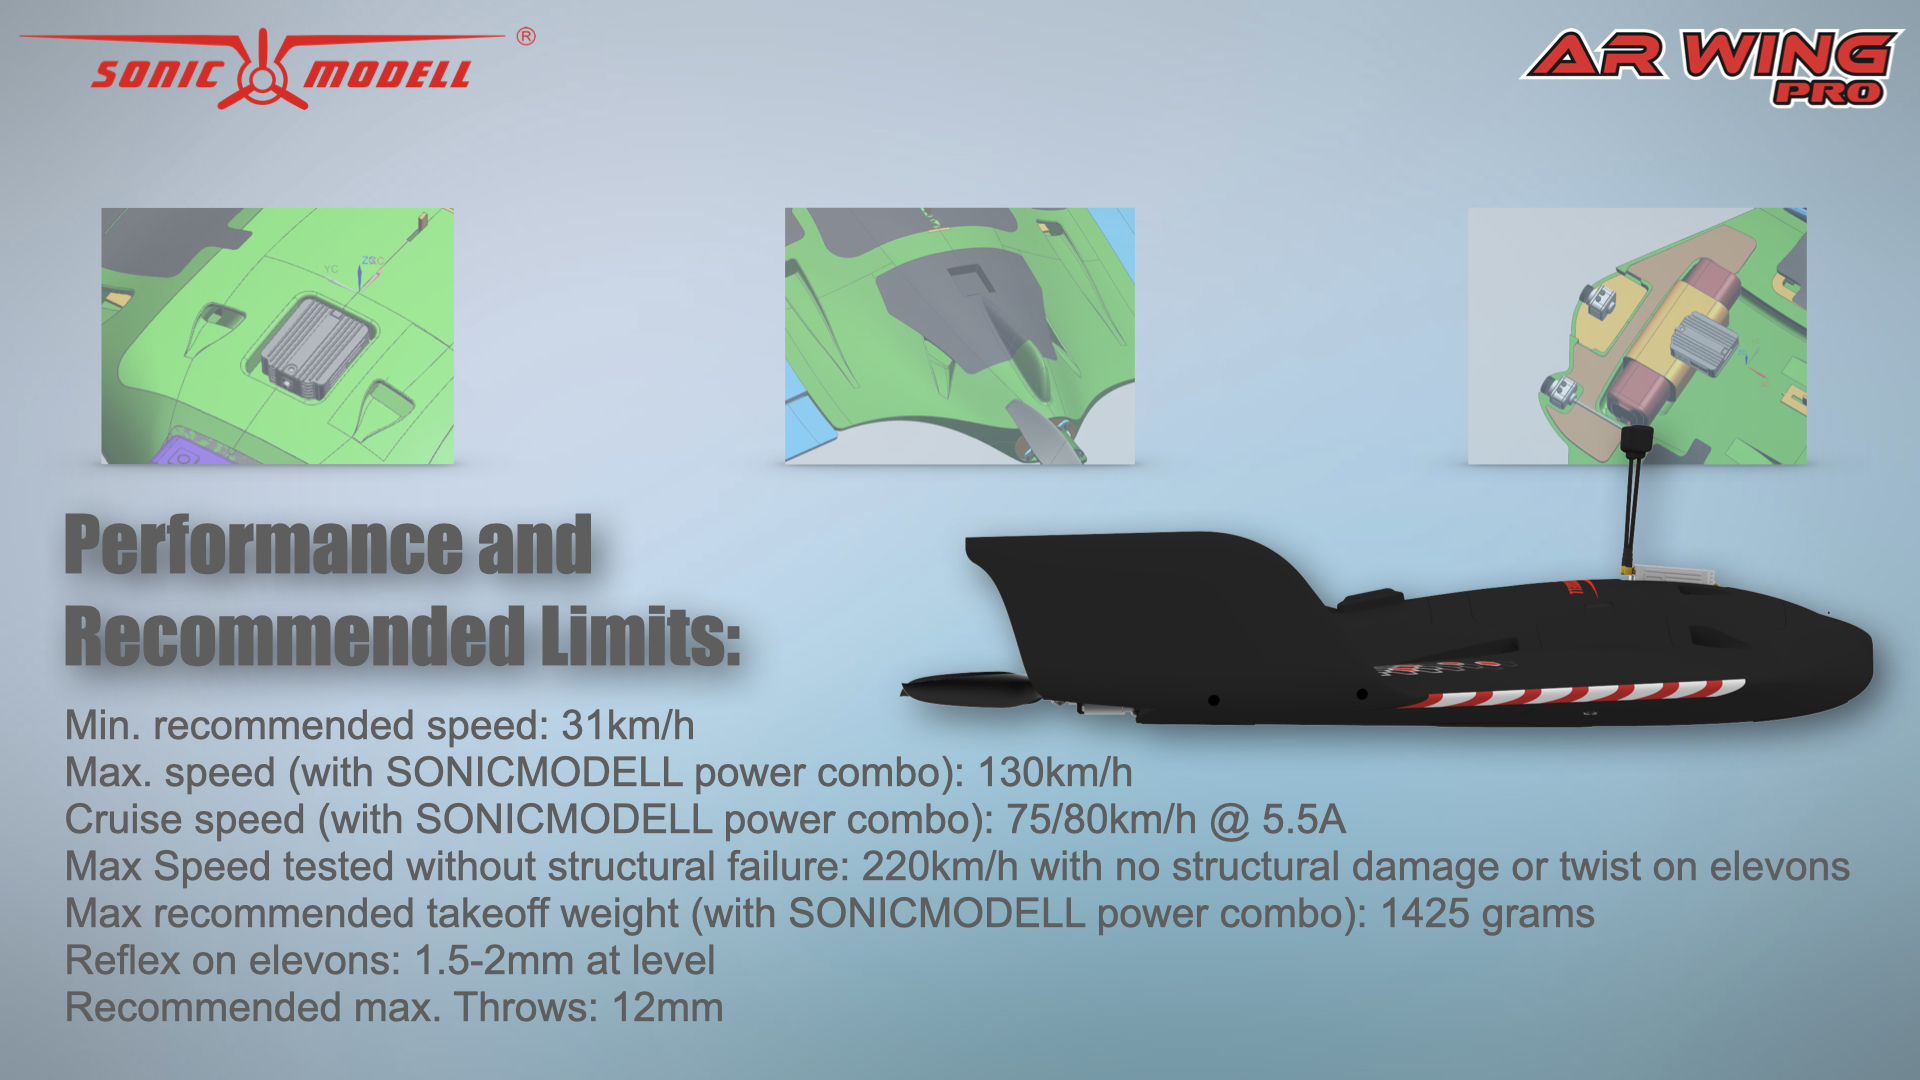 Sonicmodell-AR-Wing-Pro-1000mm-Wingspan-EPP-FPV-Flying-Wing-RC-Airplane-KITPNP-1756841-5